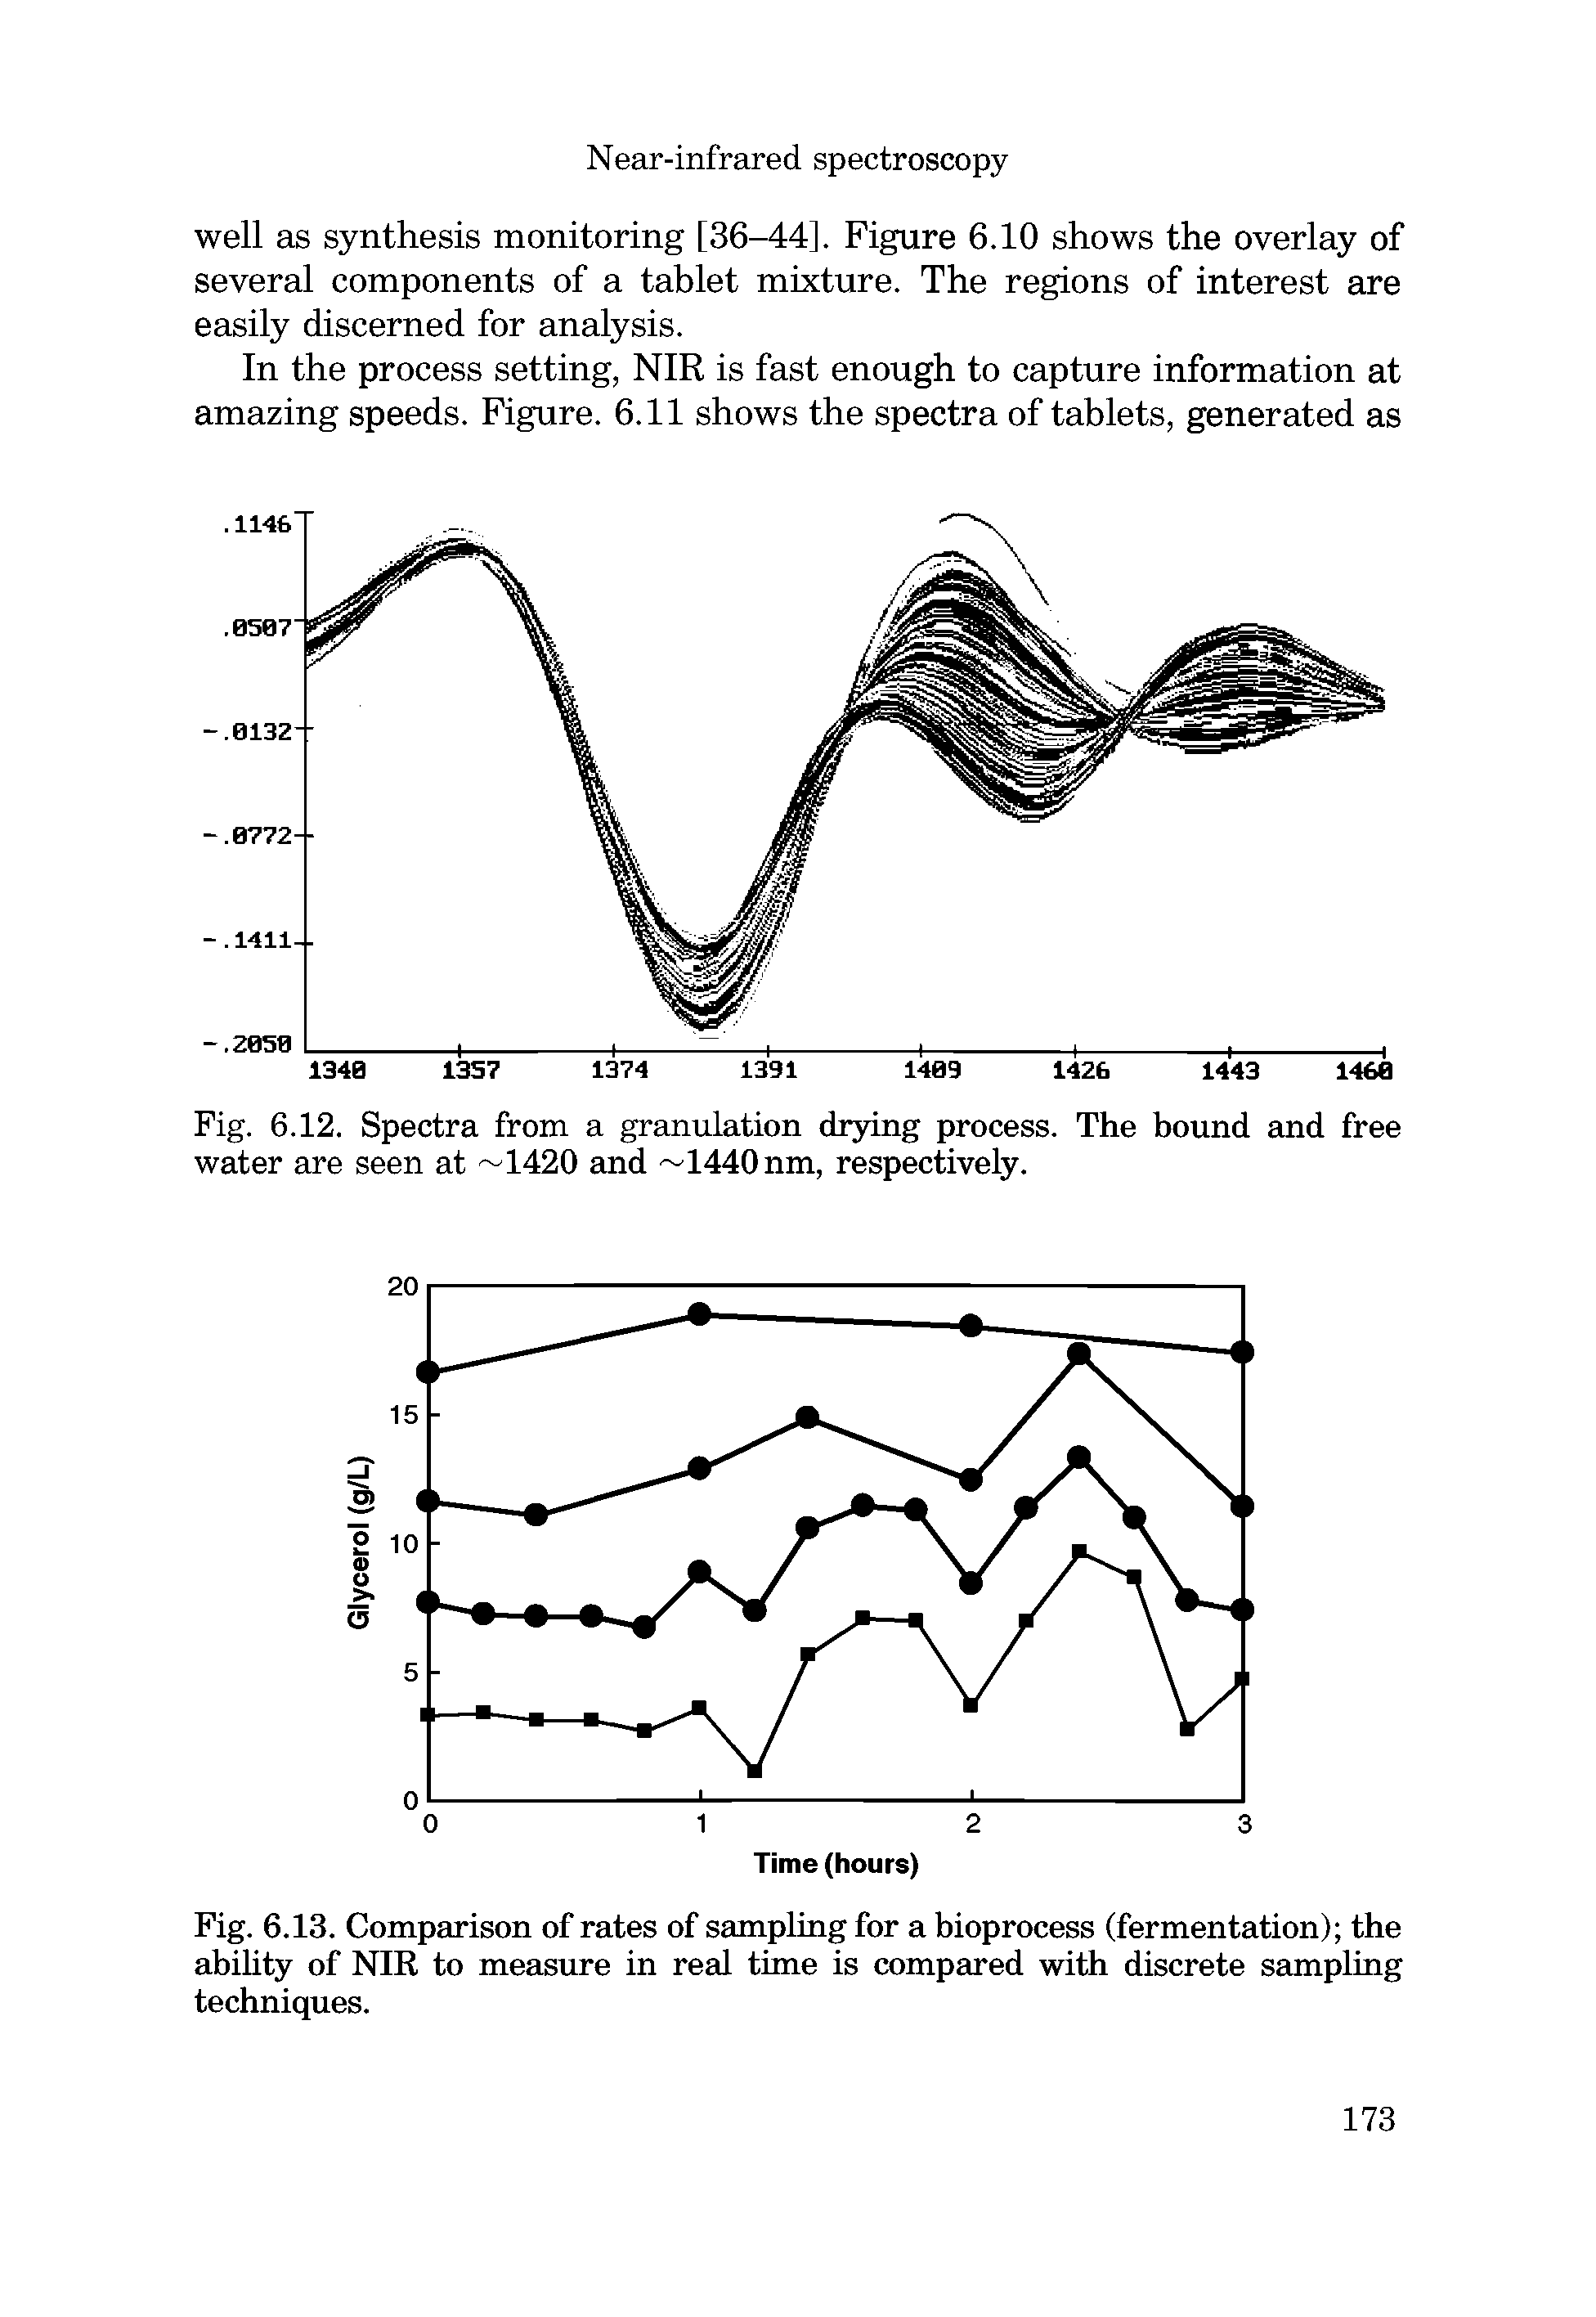 Fig. 6.12. Spectra from a granulation drying process. The bound and free water are seen at 1420 and 1440nm, respectively.